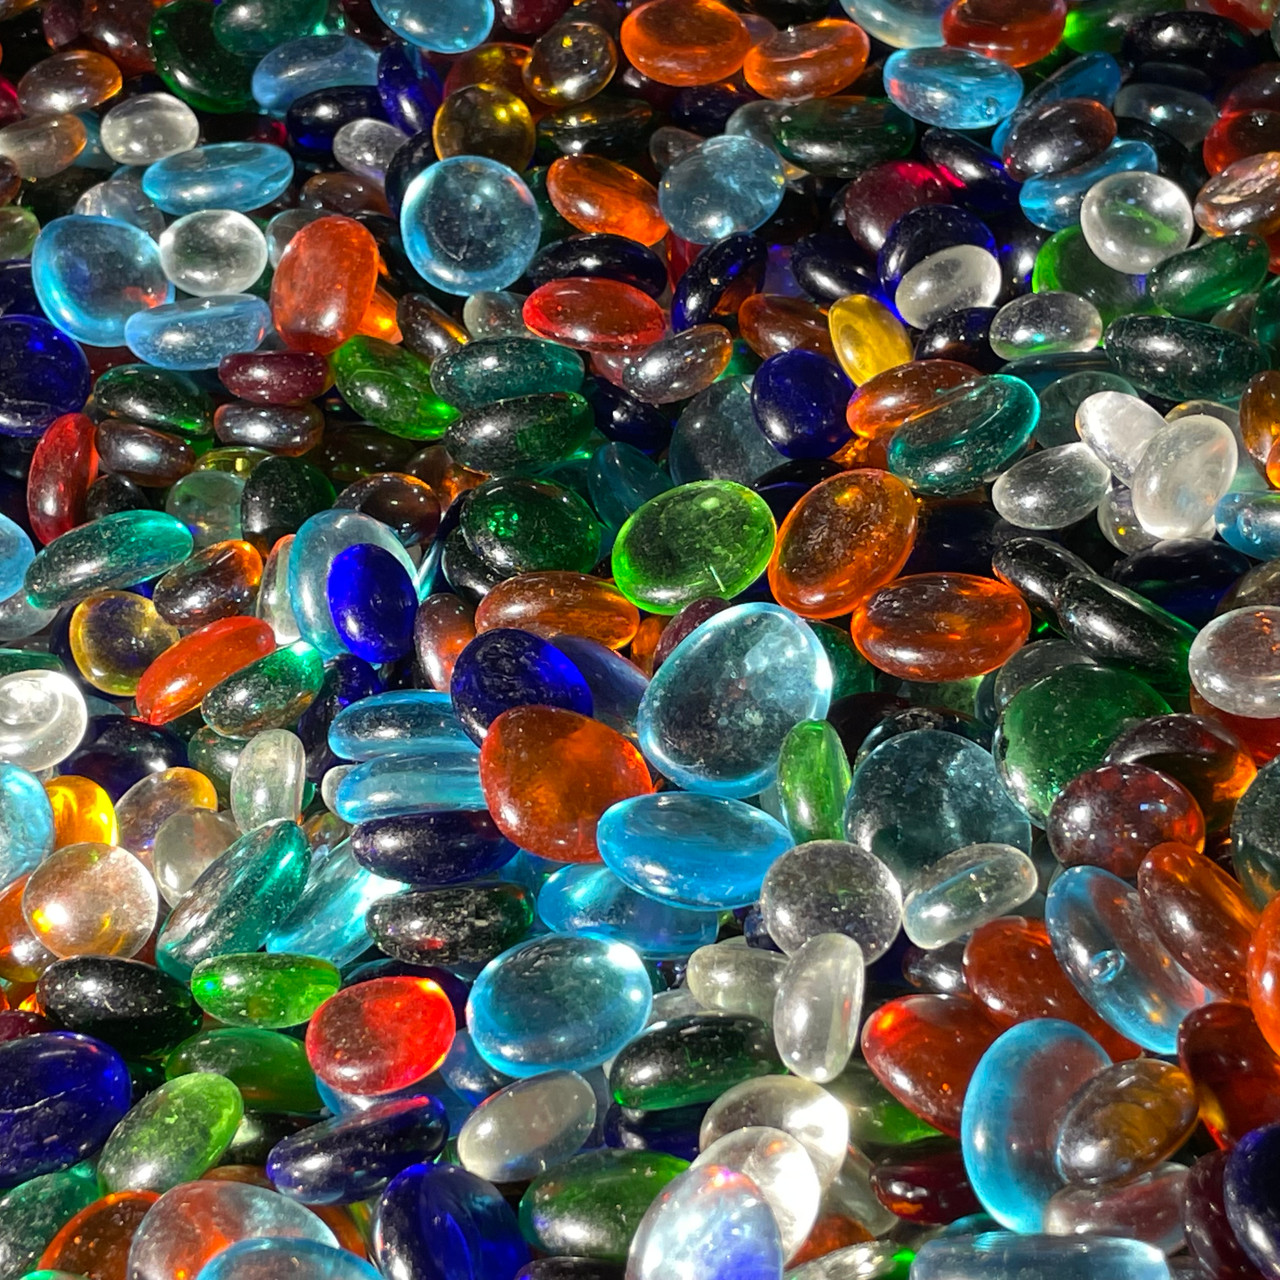 M74 16MM thick Mixed Shaped Glass Gems In Mixed Colors, Shiny